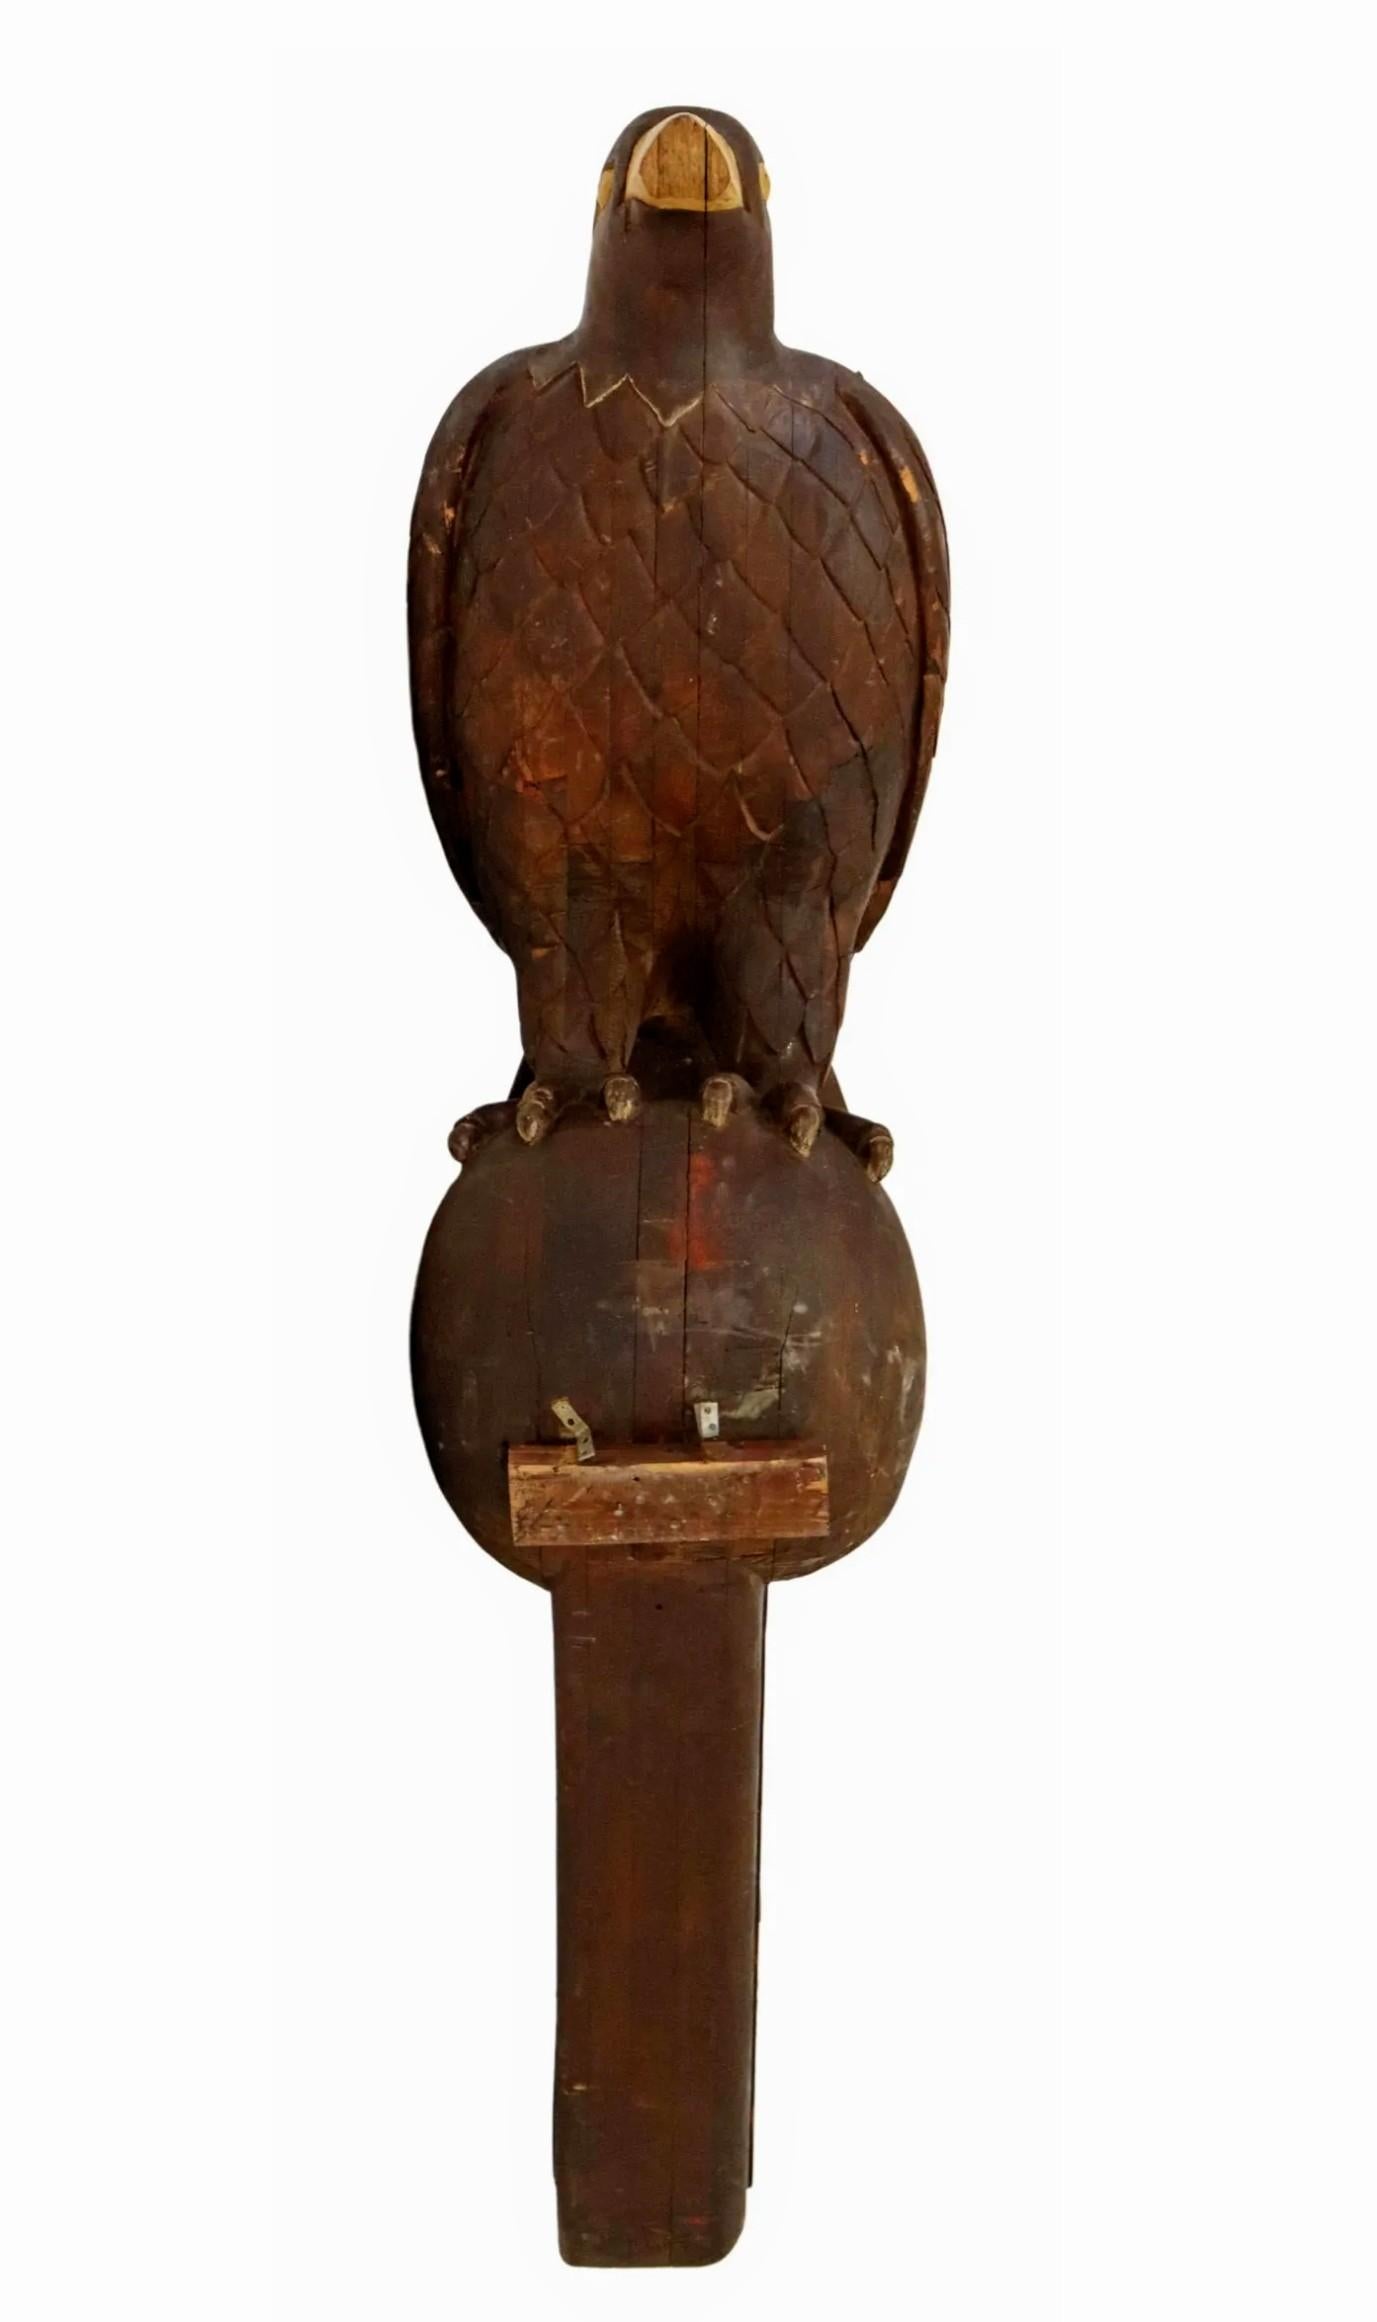 Folk Art Monumental Antique Architectural Wood Carving Perched Eagle Bird For Sale